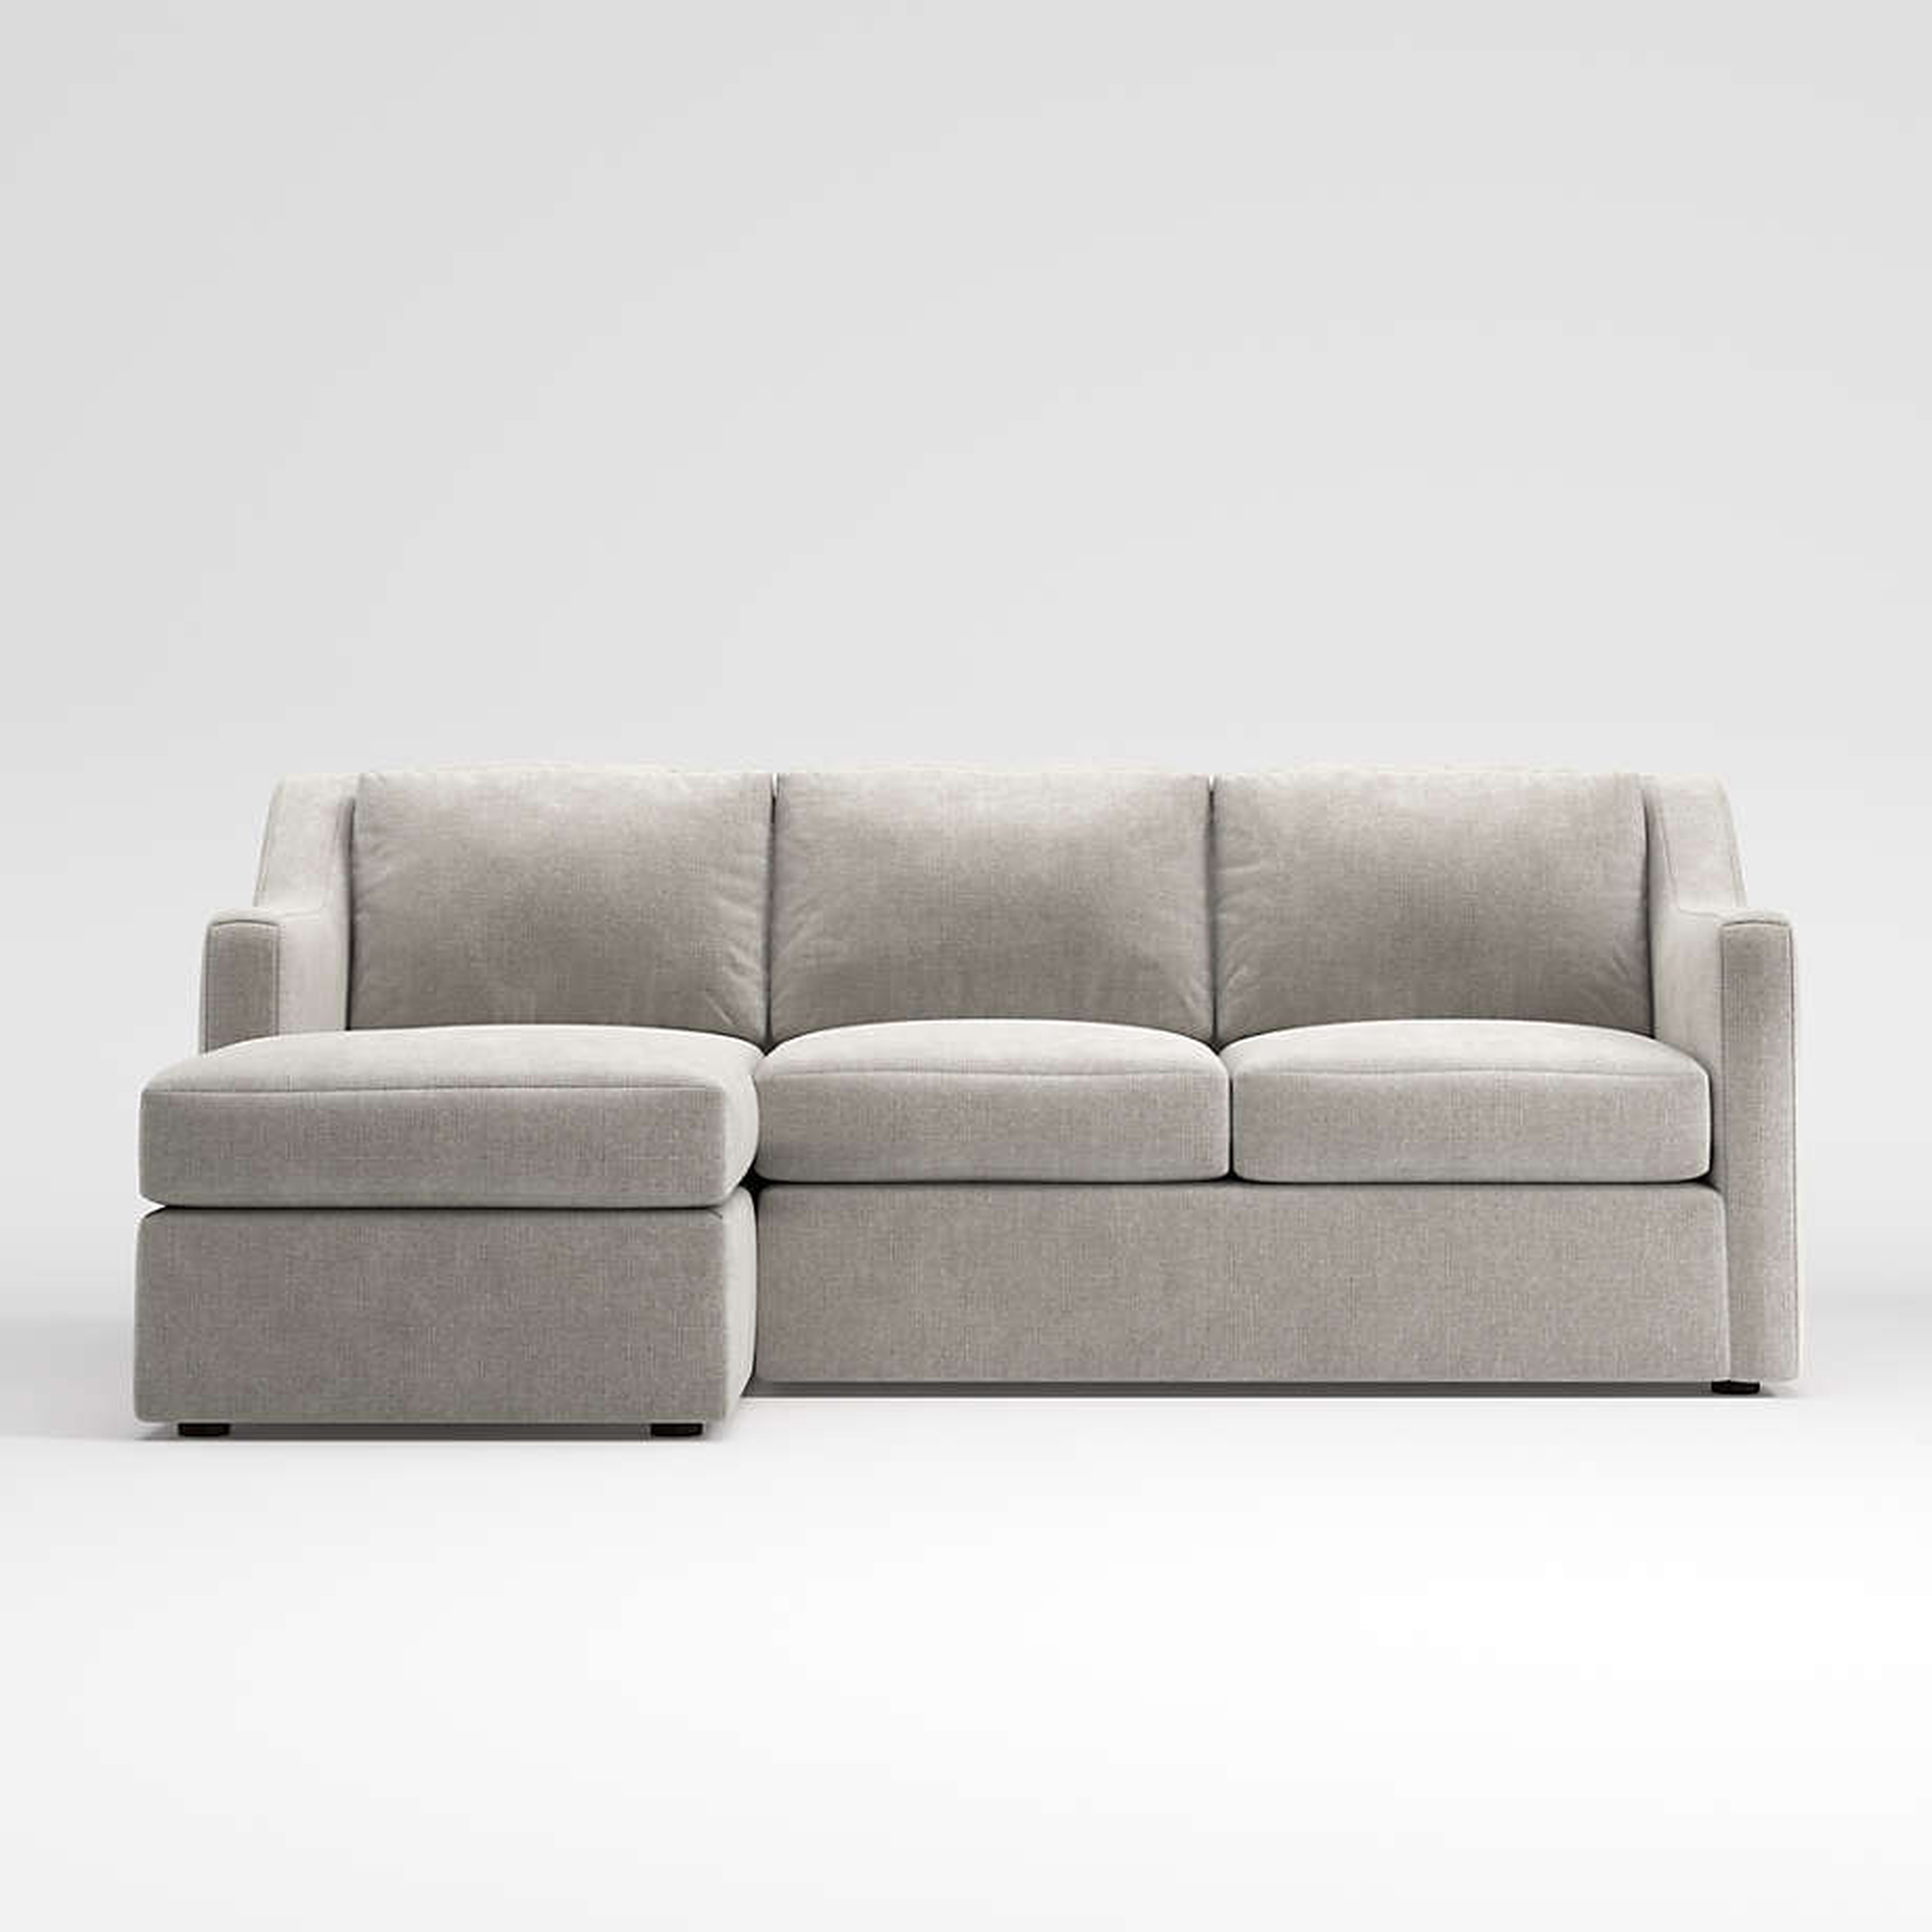 Notch Reversible Lounger Sectional Sofa - Crate and Barrel